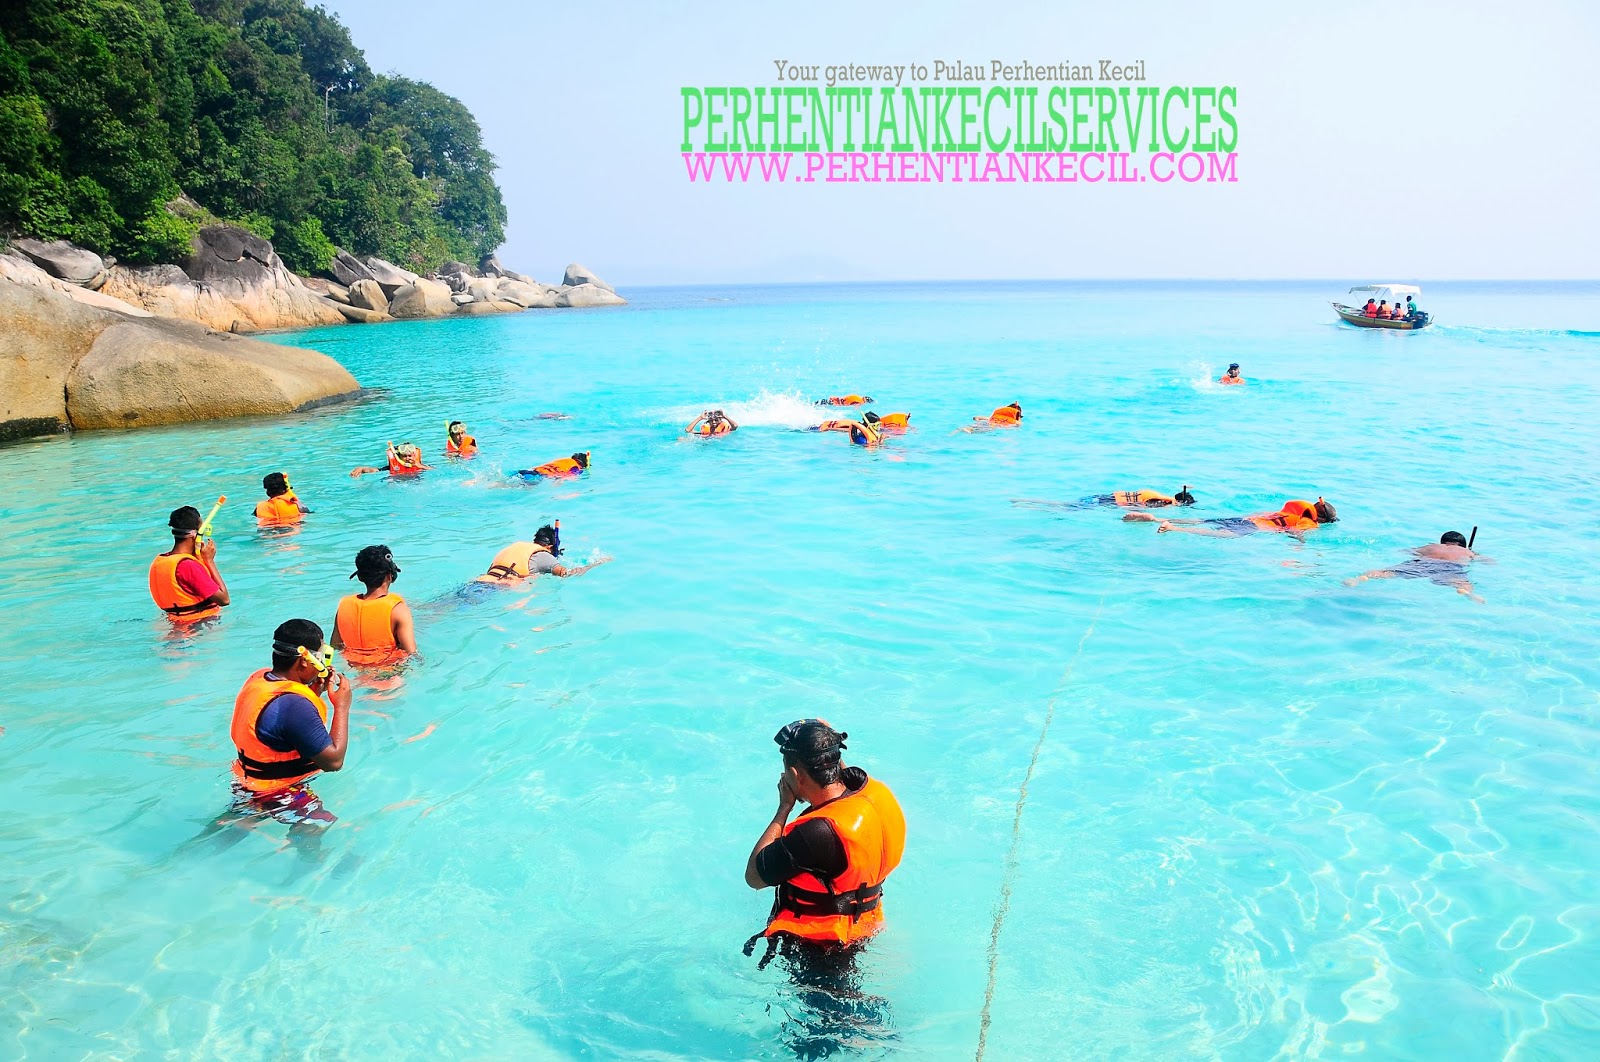 Pulau Perhentian Kecil Package 2016: HOW TO GET TO PERHENTIAN KECIL